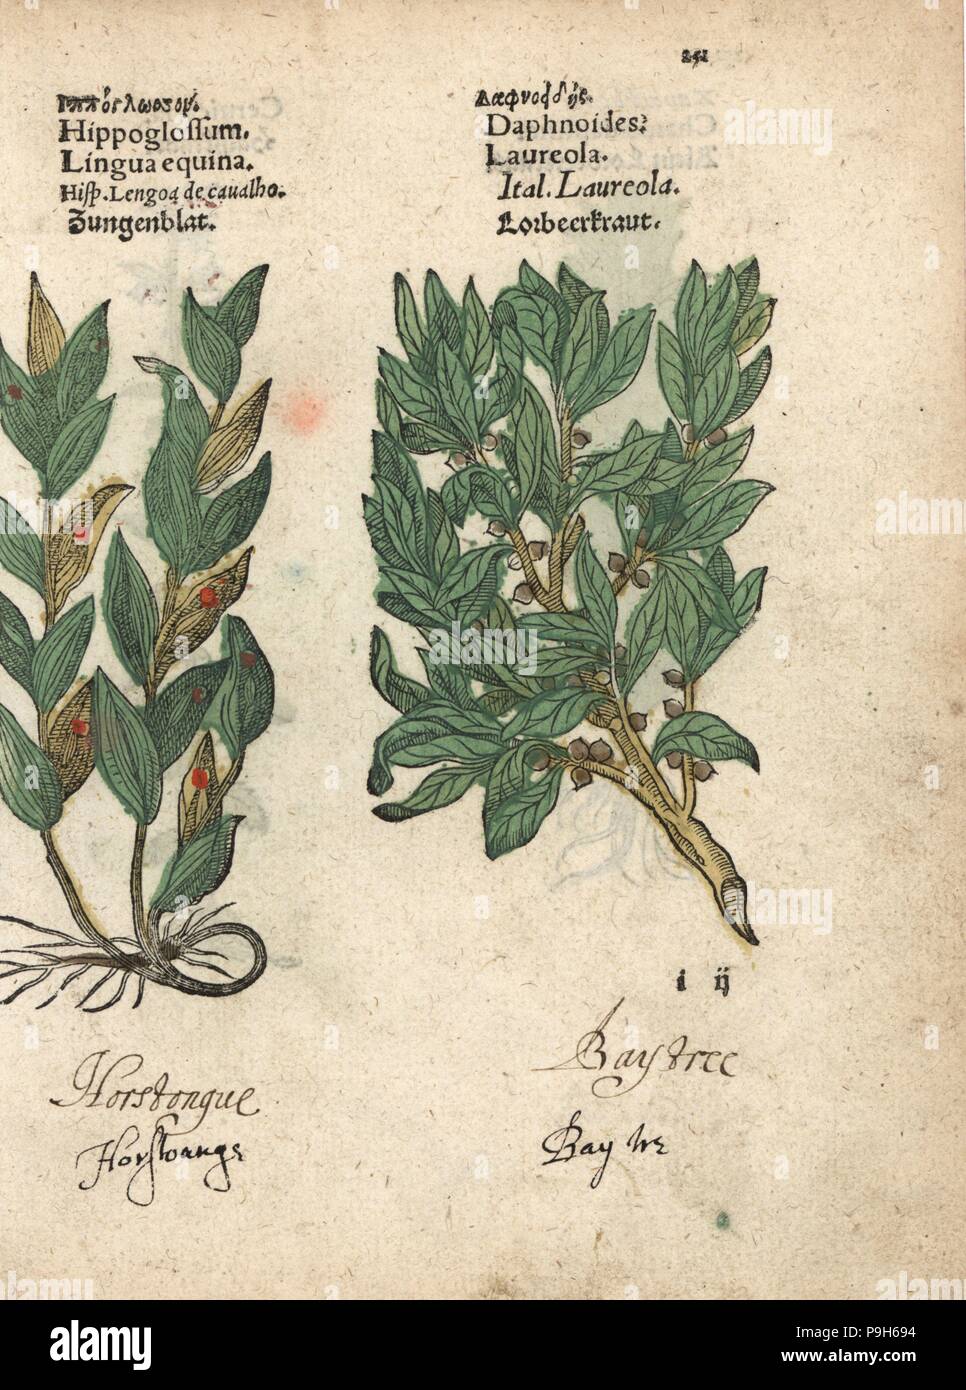 Spineless butcher's-broom, Ruscus hypoglossum, and spurge laurel, Daphne laureola. Handcoloured woodblock engraving of a botanical illustration from Adam Lonicer's Krauterbuch, or Herbal, Frankfurt, 1557. This from a 17th century pirate edition or atlas of illustrations only, with captions in Latin, Greek, French, Italian, German, and in English manuscript. Stock Photo